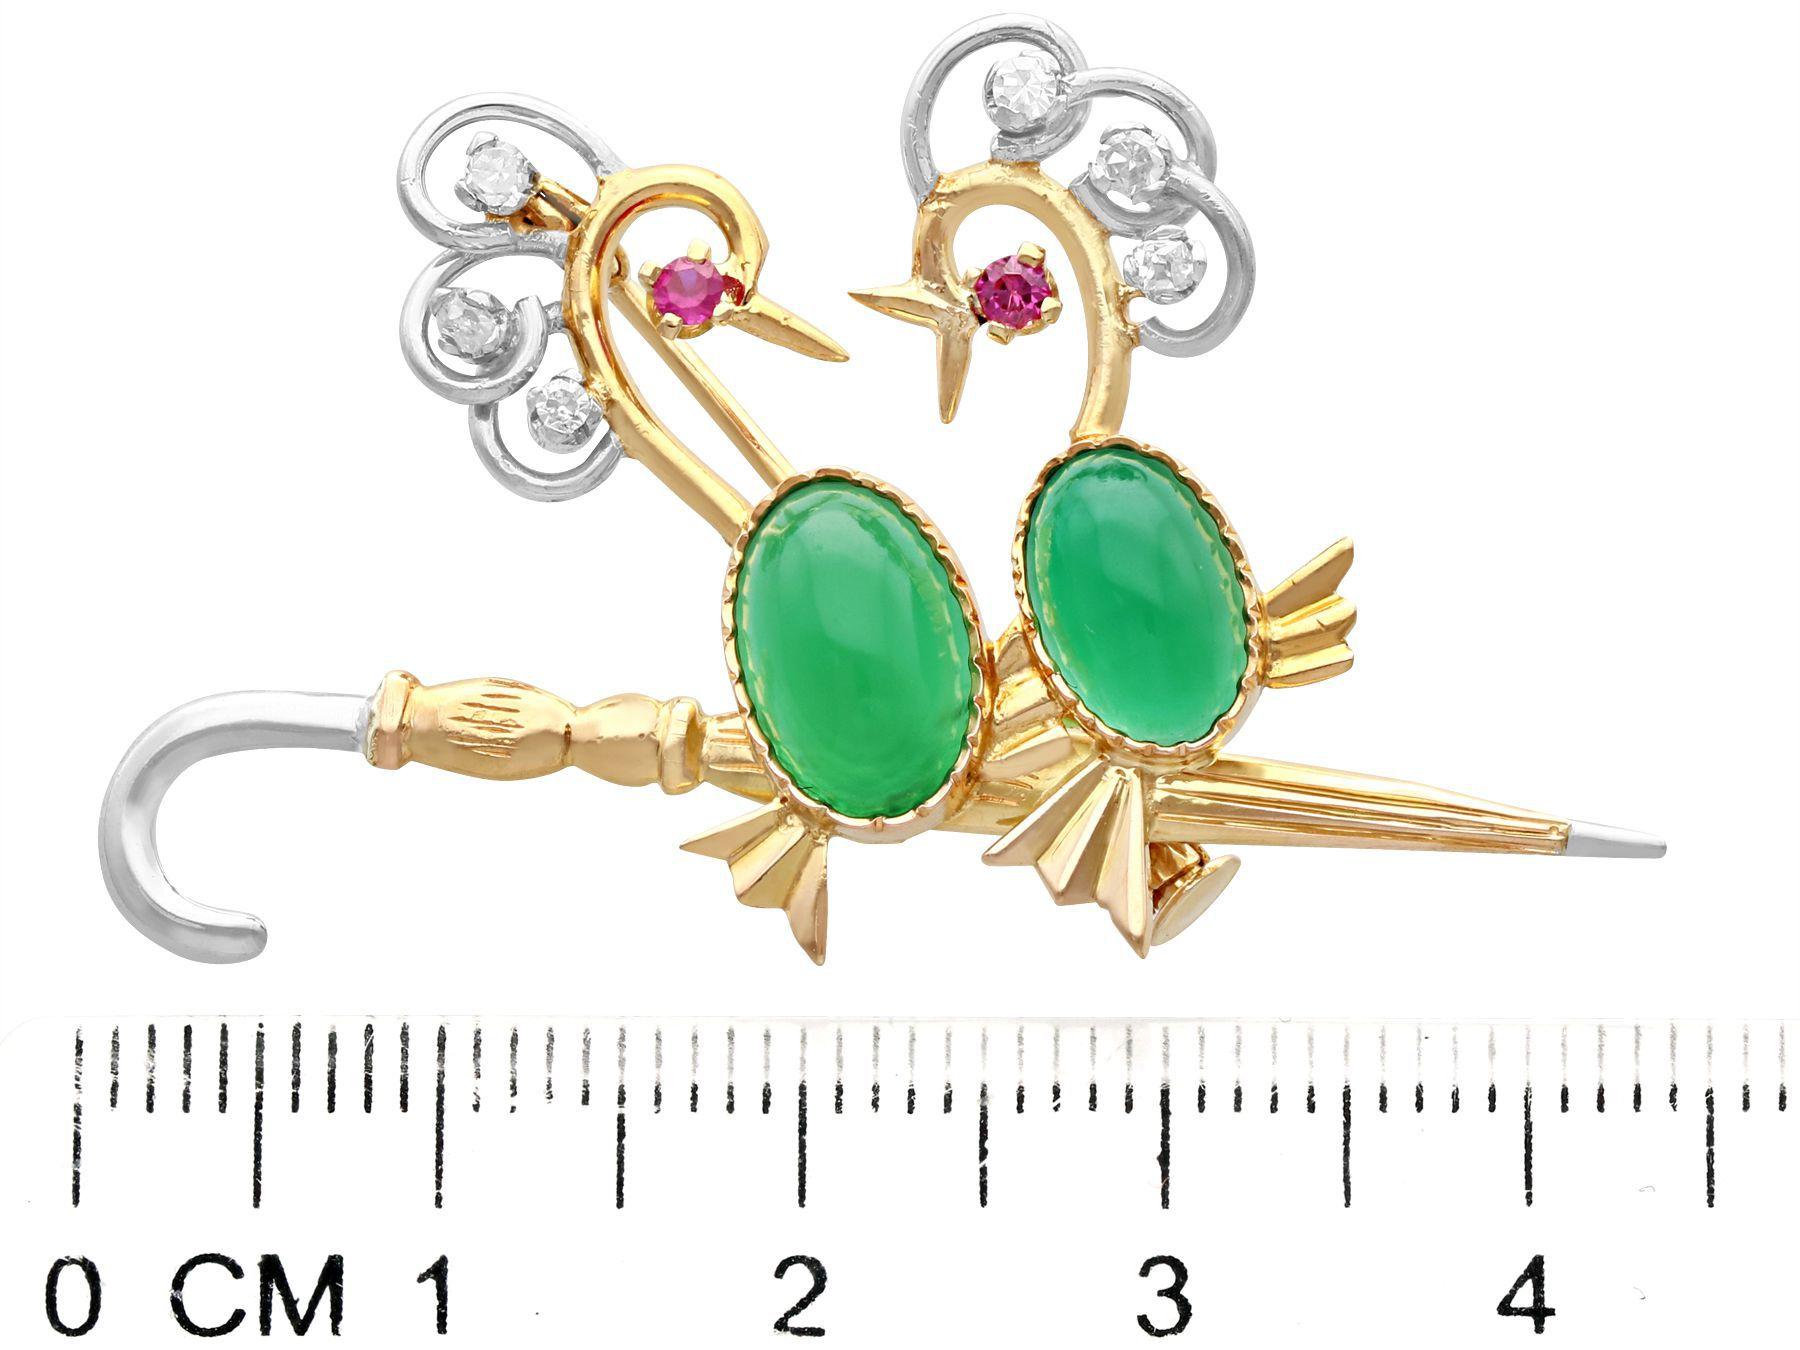 2.71 Carat Cabochon Cut Chrysoprase Diamond and Ruby 18k Yellow Gold Brooch For Sale 2